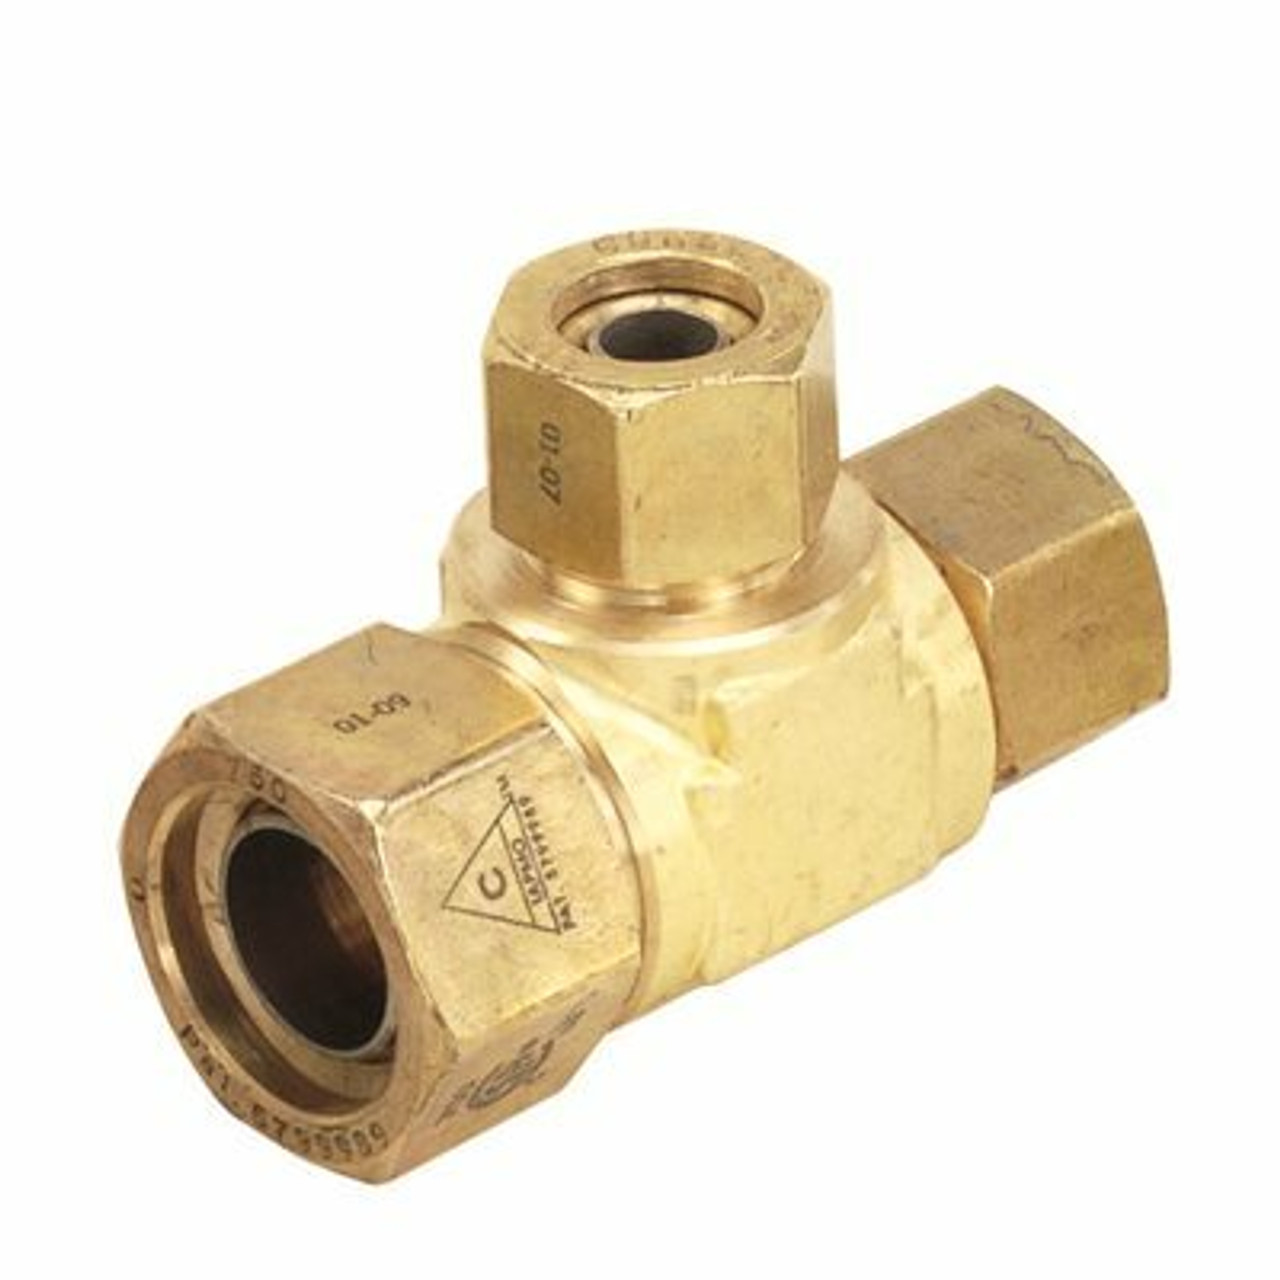 Omega Flex Trac Pipe Autoflare Fitting Tee 3/4 In. X 1/2 In. X 1/2 In.*